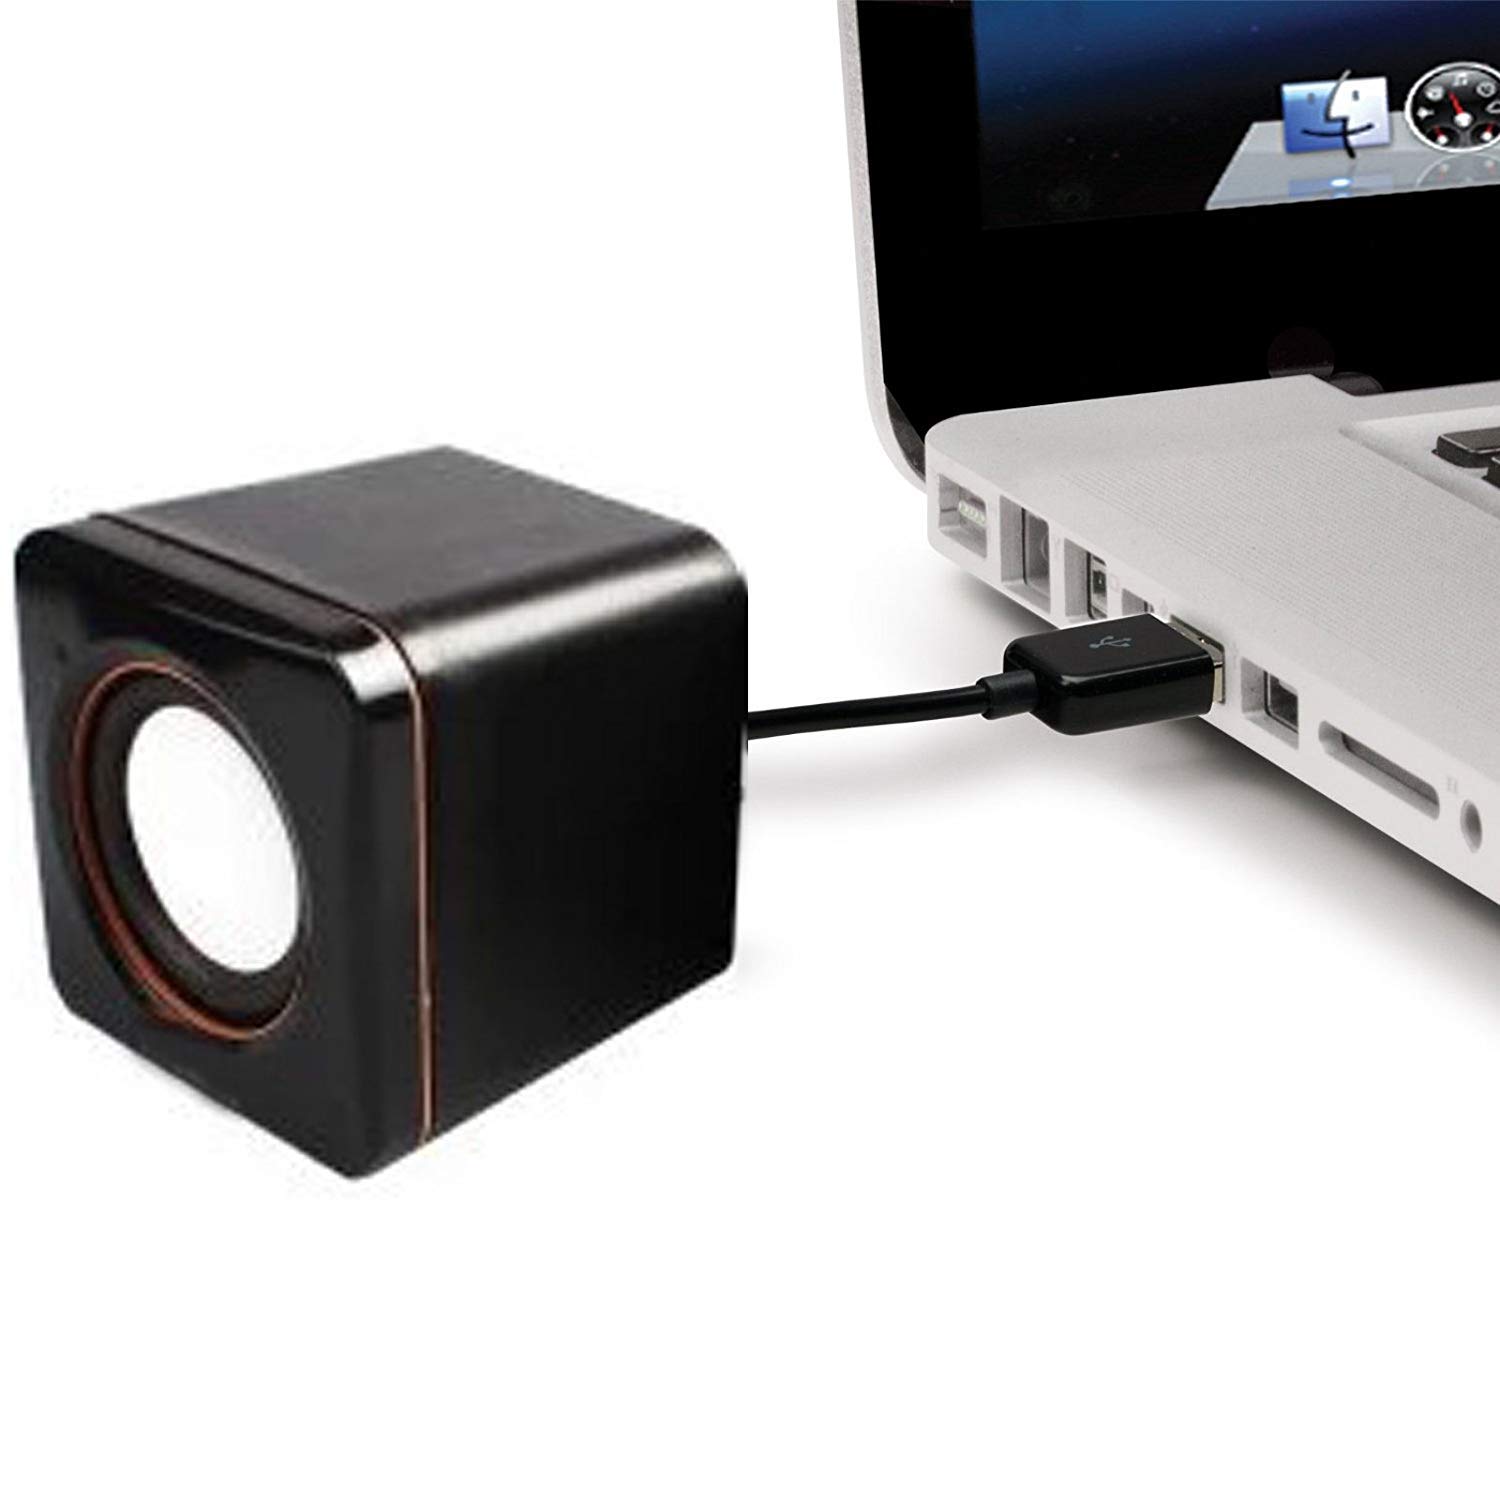 Portable Computer Speakers USB Powered Desktop Mini Speaker Bass Sound Music Player System Wired Small Speaker - image 2 of 7